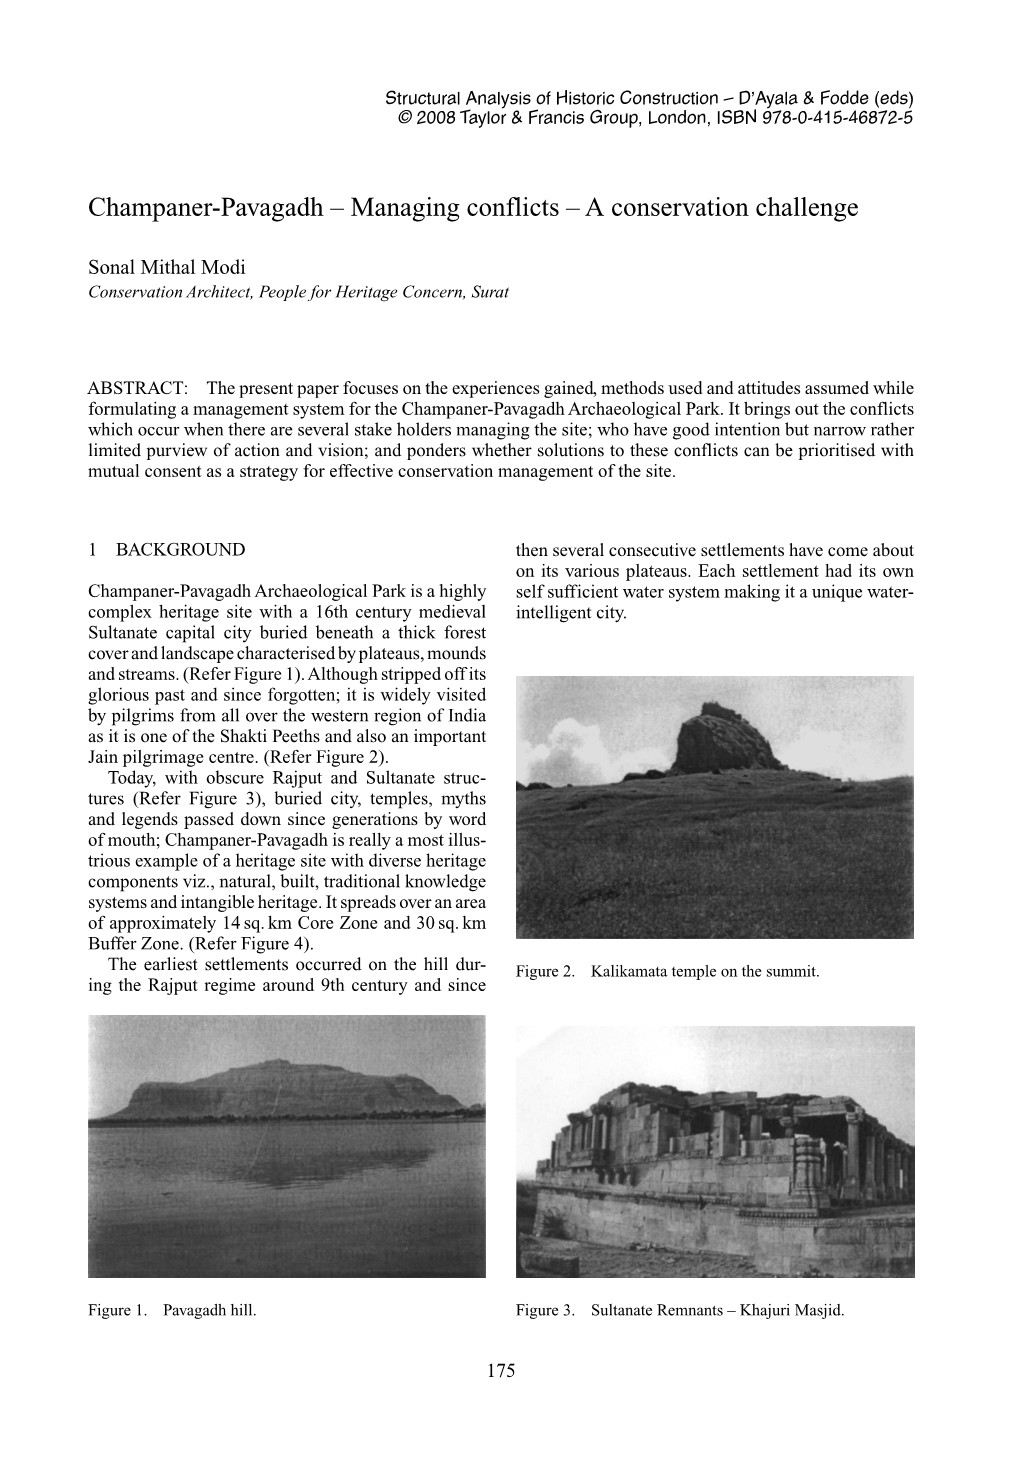 Champaner-Pavagadh – Managing Conflicts – a Conservation Challenge